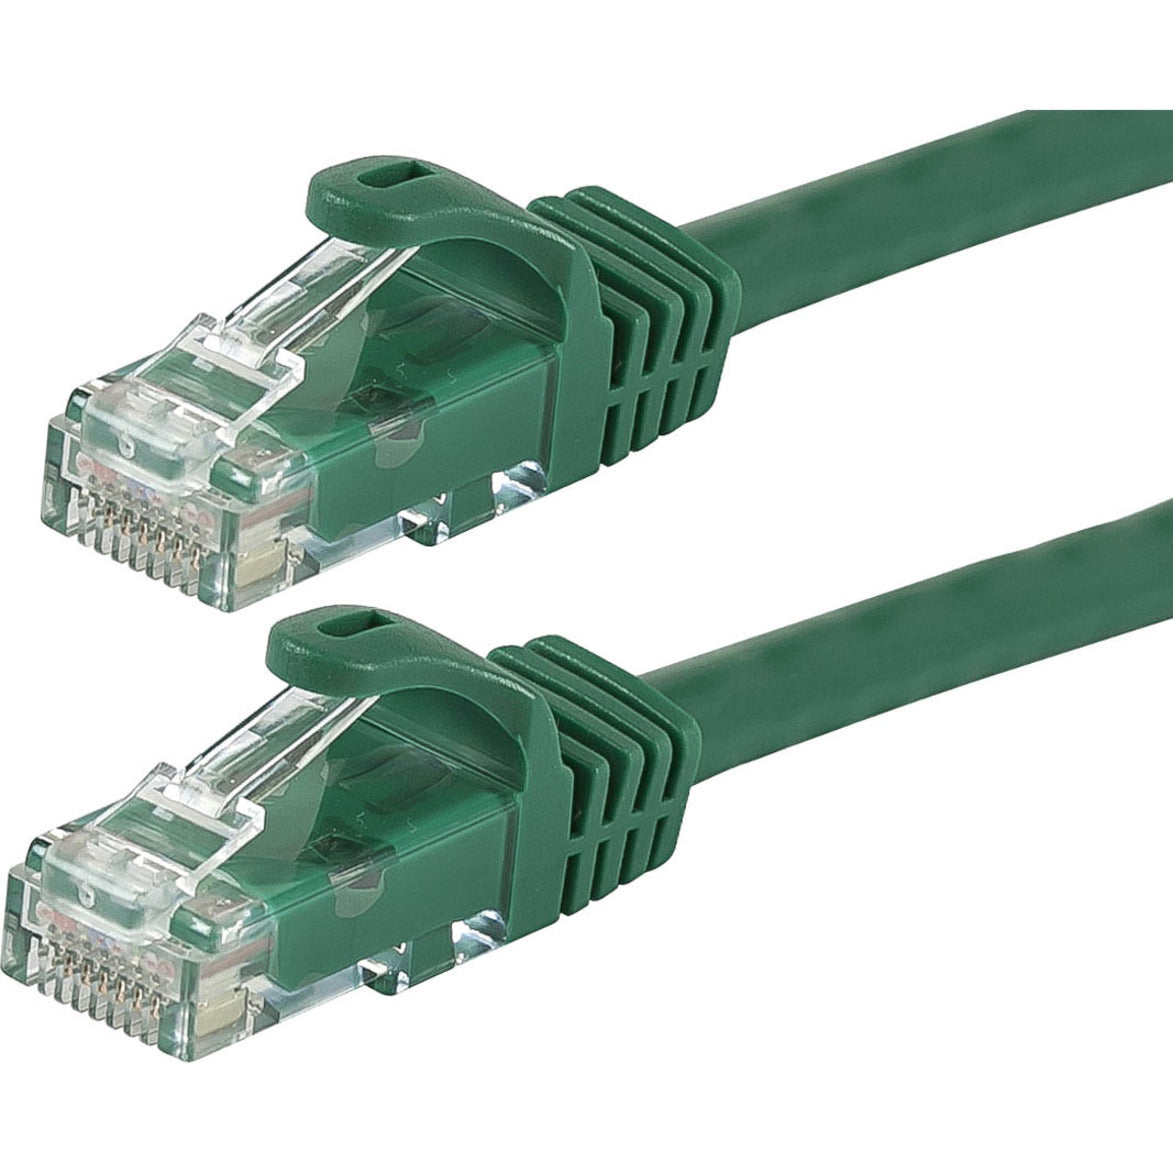 Monoprice 11343 FLEXboot Series Cat5e 24AWG UTP Ethernet Network Patch Cable, 50ft Green